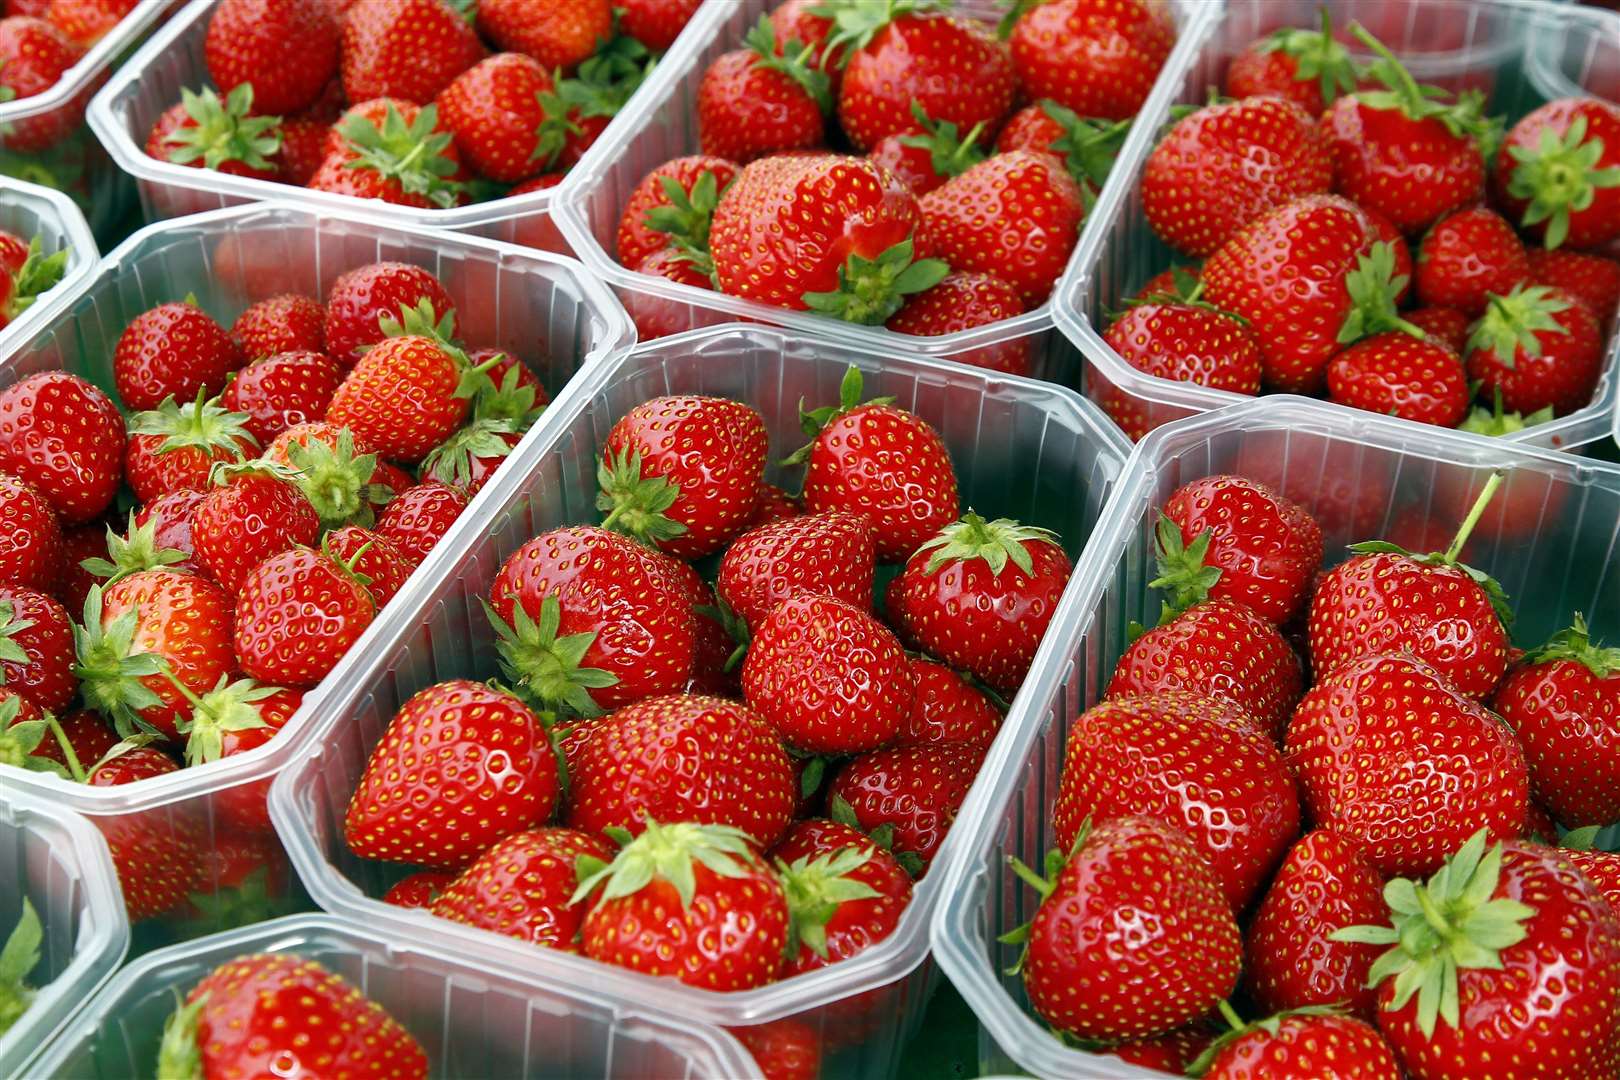 Thousands of strawberries will be served at Wimbledon, but the crop is among those at risk if our population of pollinators dwindles